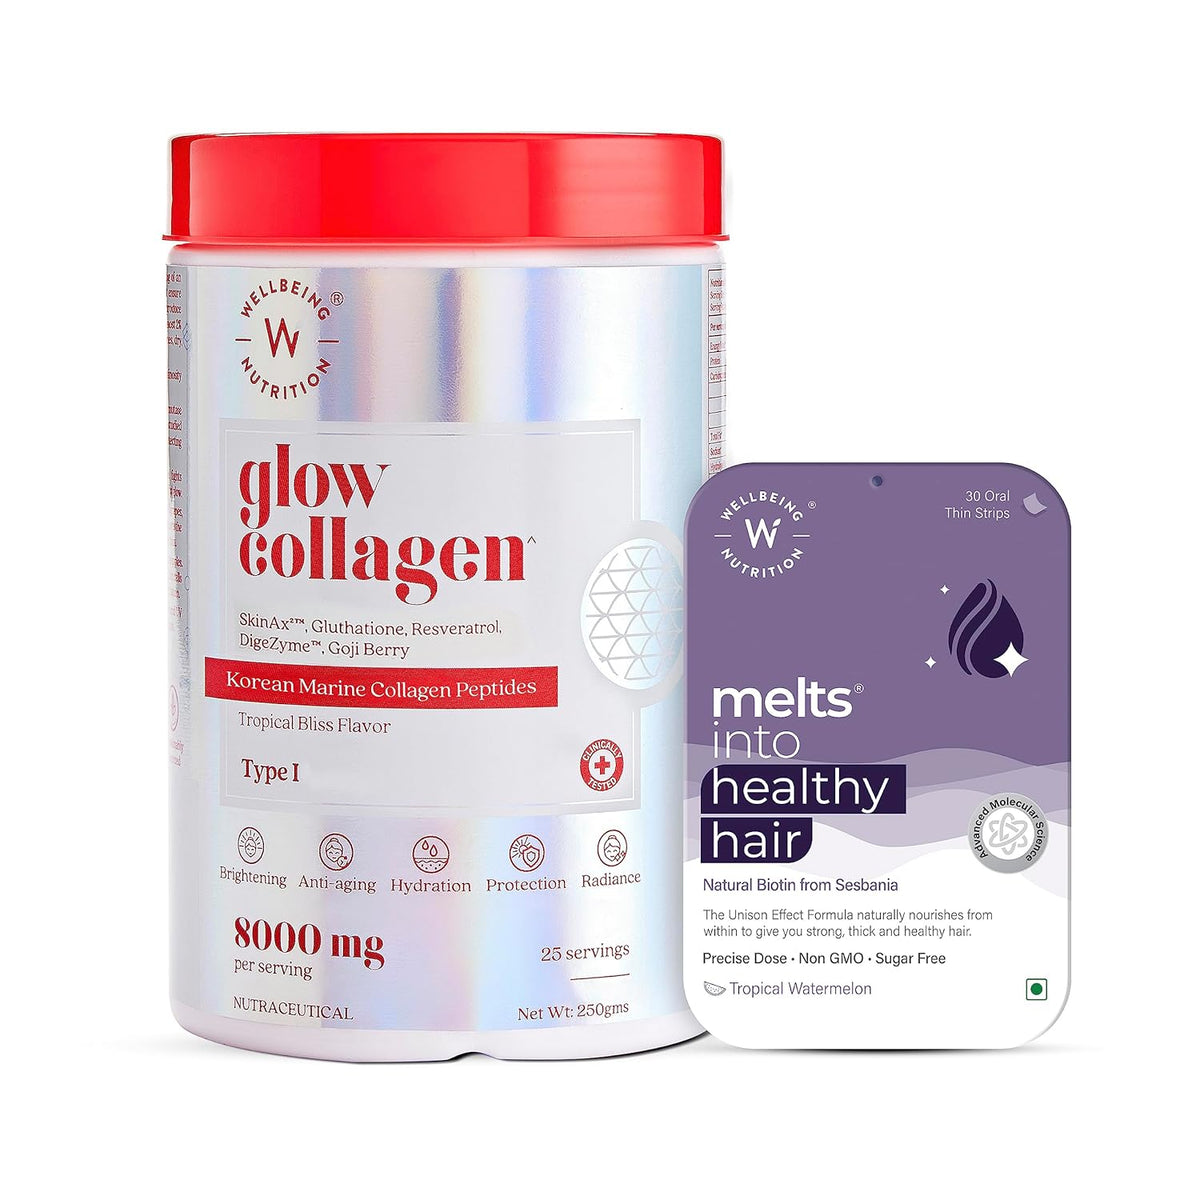 Wellbeing Nutrition Skin & Hair Combo | Japanese Marine Collagen Peptides, SkinAx² for skin & Plant-based Biotin for Hair Nourishment (200 gms Collagen + 30 Oral Strips)